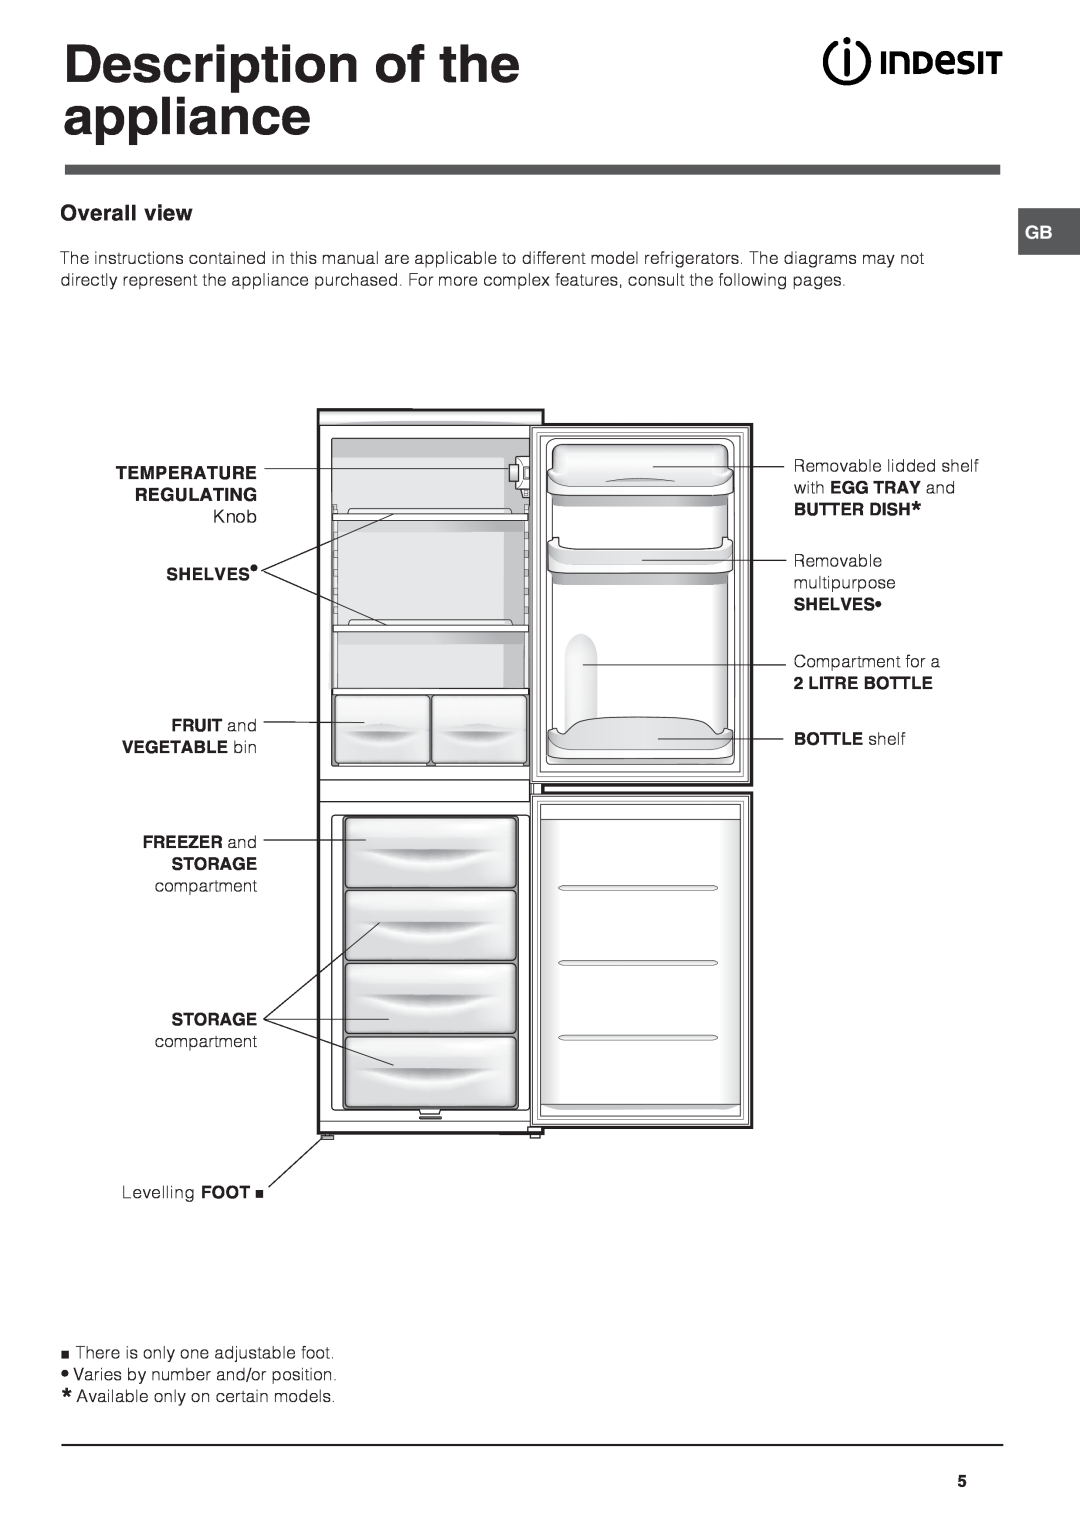 Indesit CA 55 XX manual Description of the, appliance, Overall view 